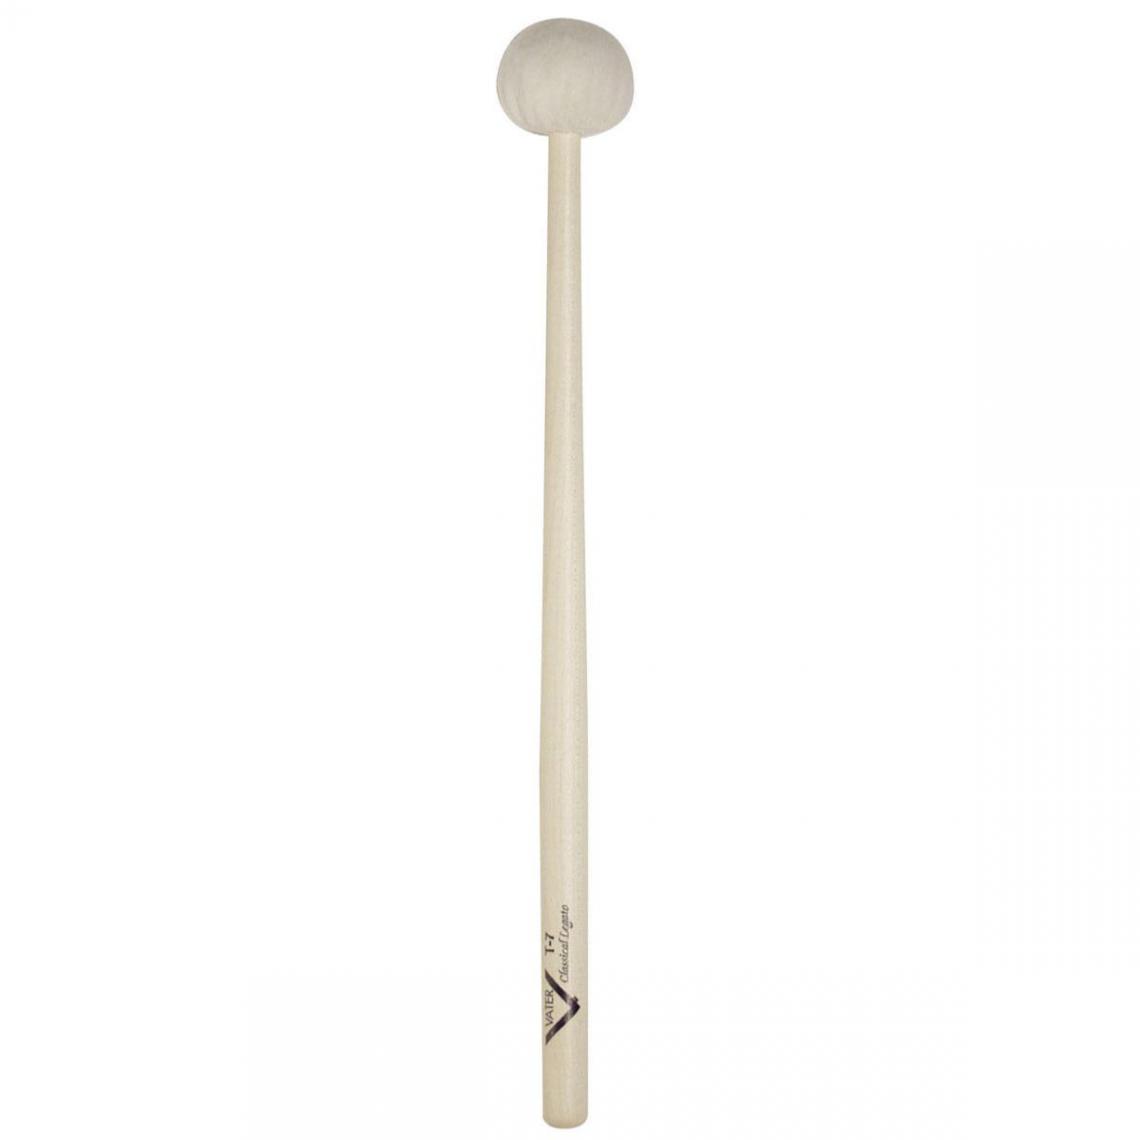 Vater - VATER VMT7 - Mailloches timbales vater CL. Legato - Accessoires percussions